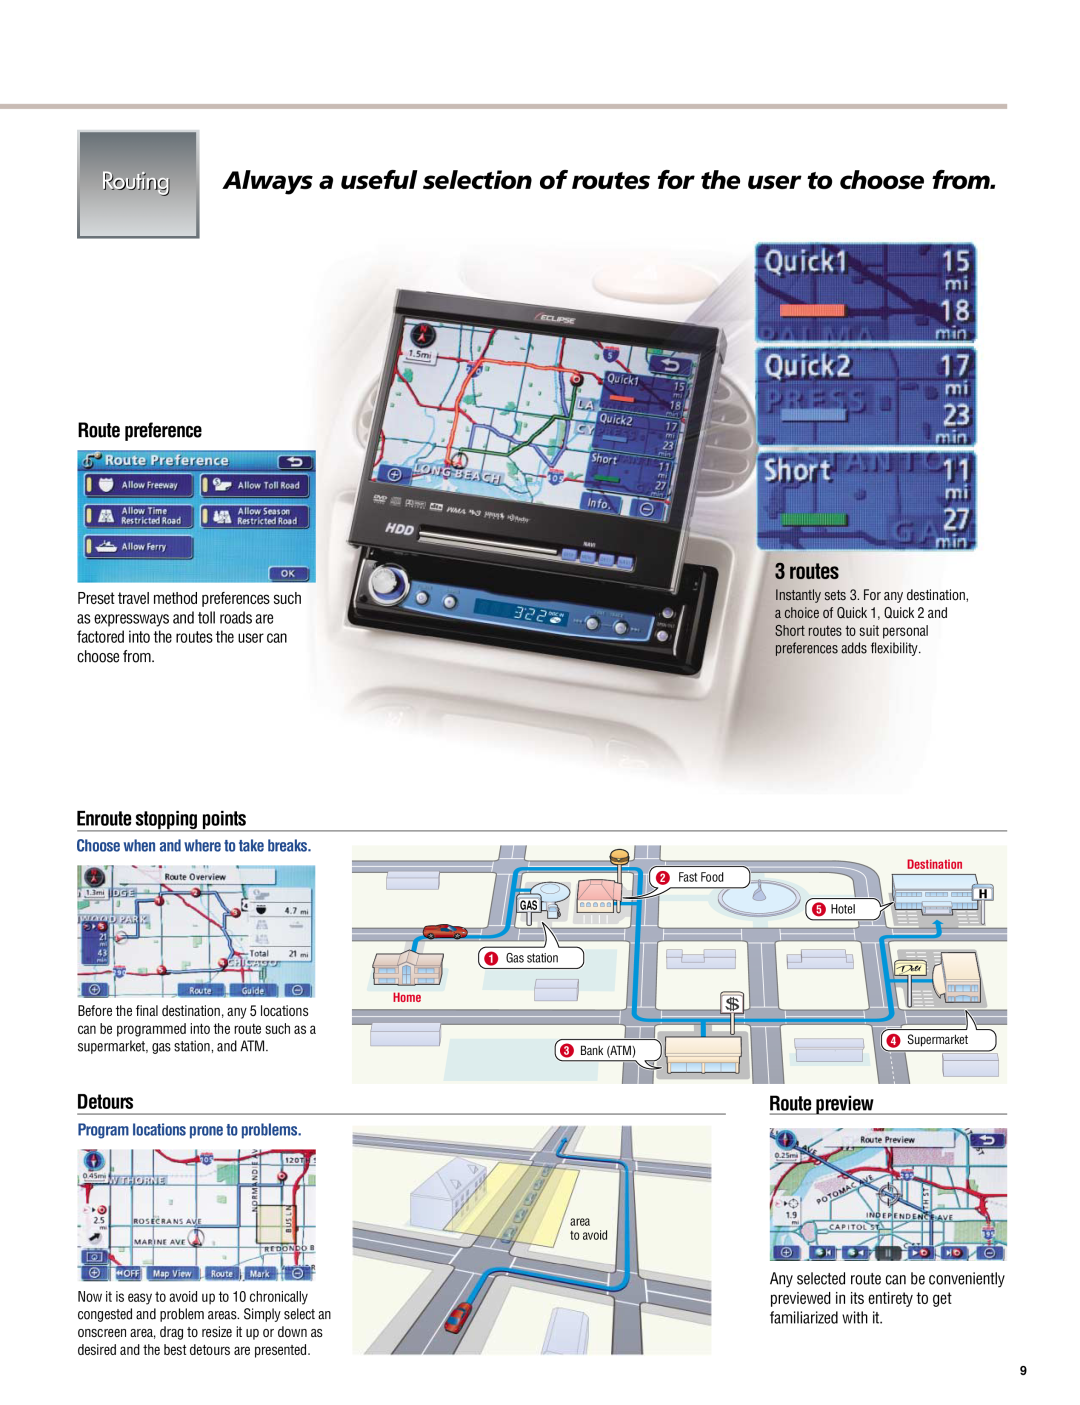 Eclipse - Fujitsu Ten AEX403 manual routes, Choose when and where to take breaks, Program locations prone to problems, Home 